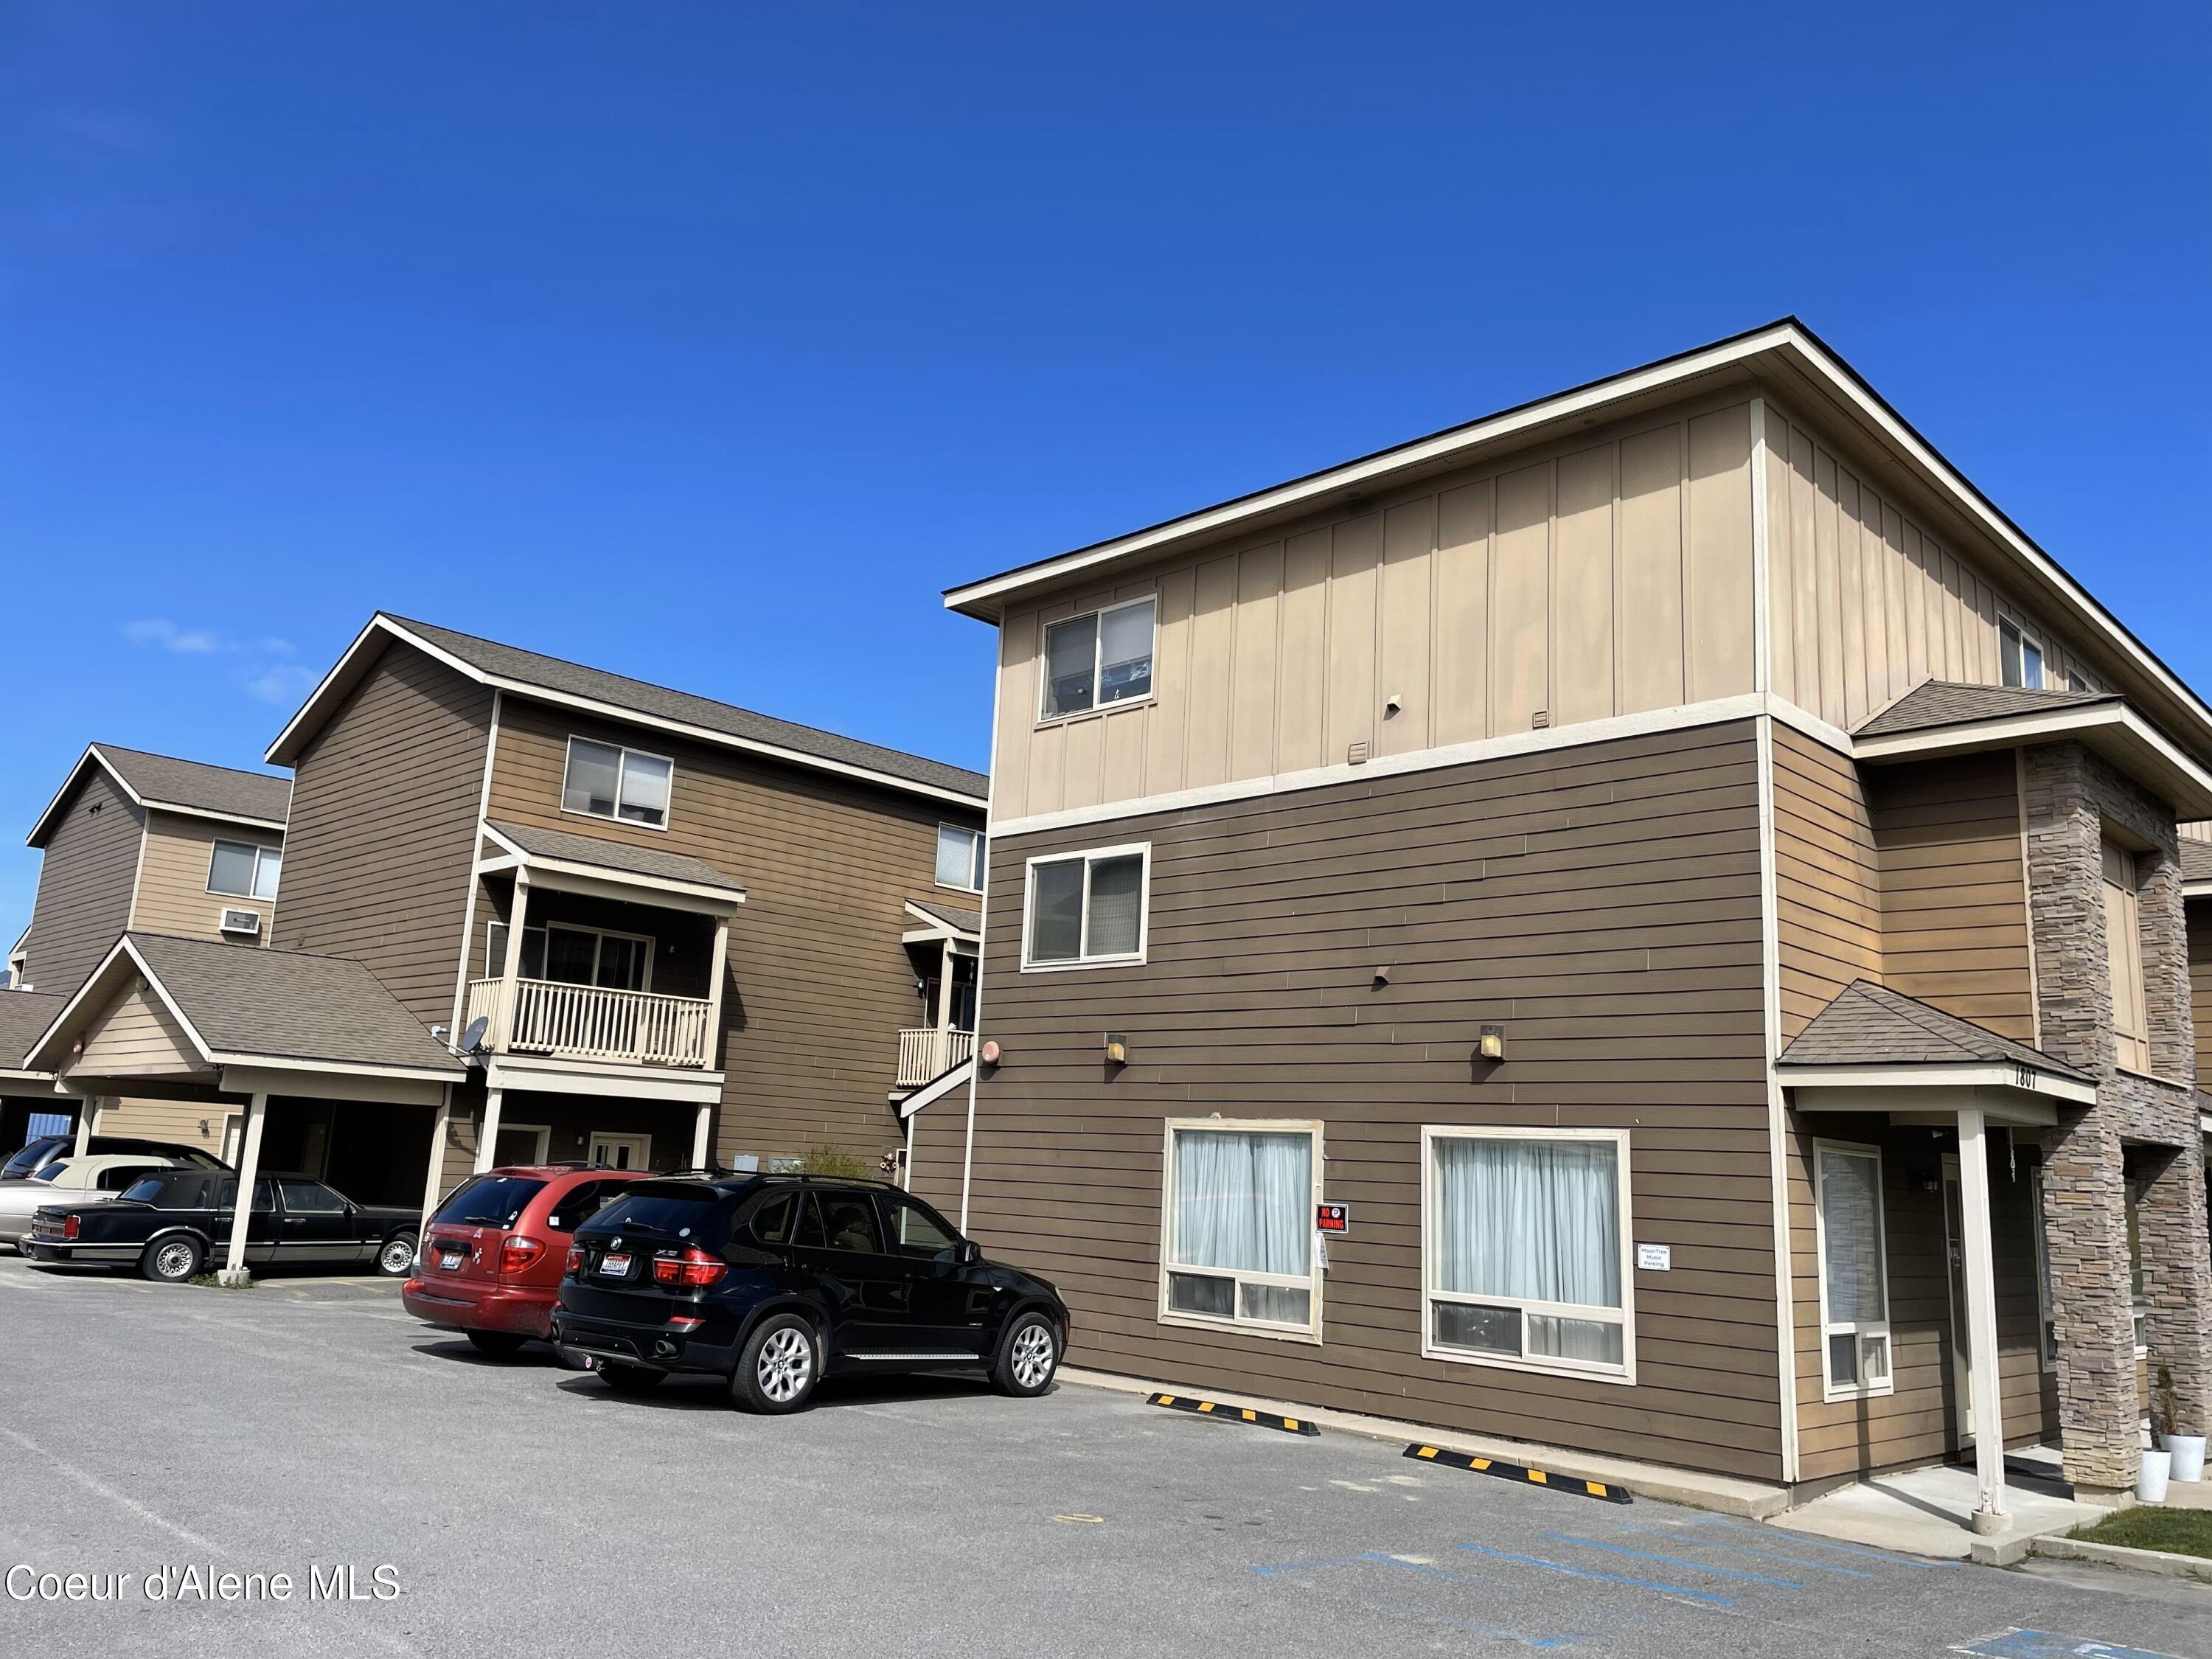 Property Image for 1807 Culvers Dr Unit 3